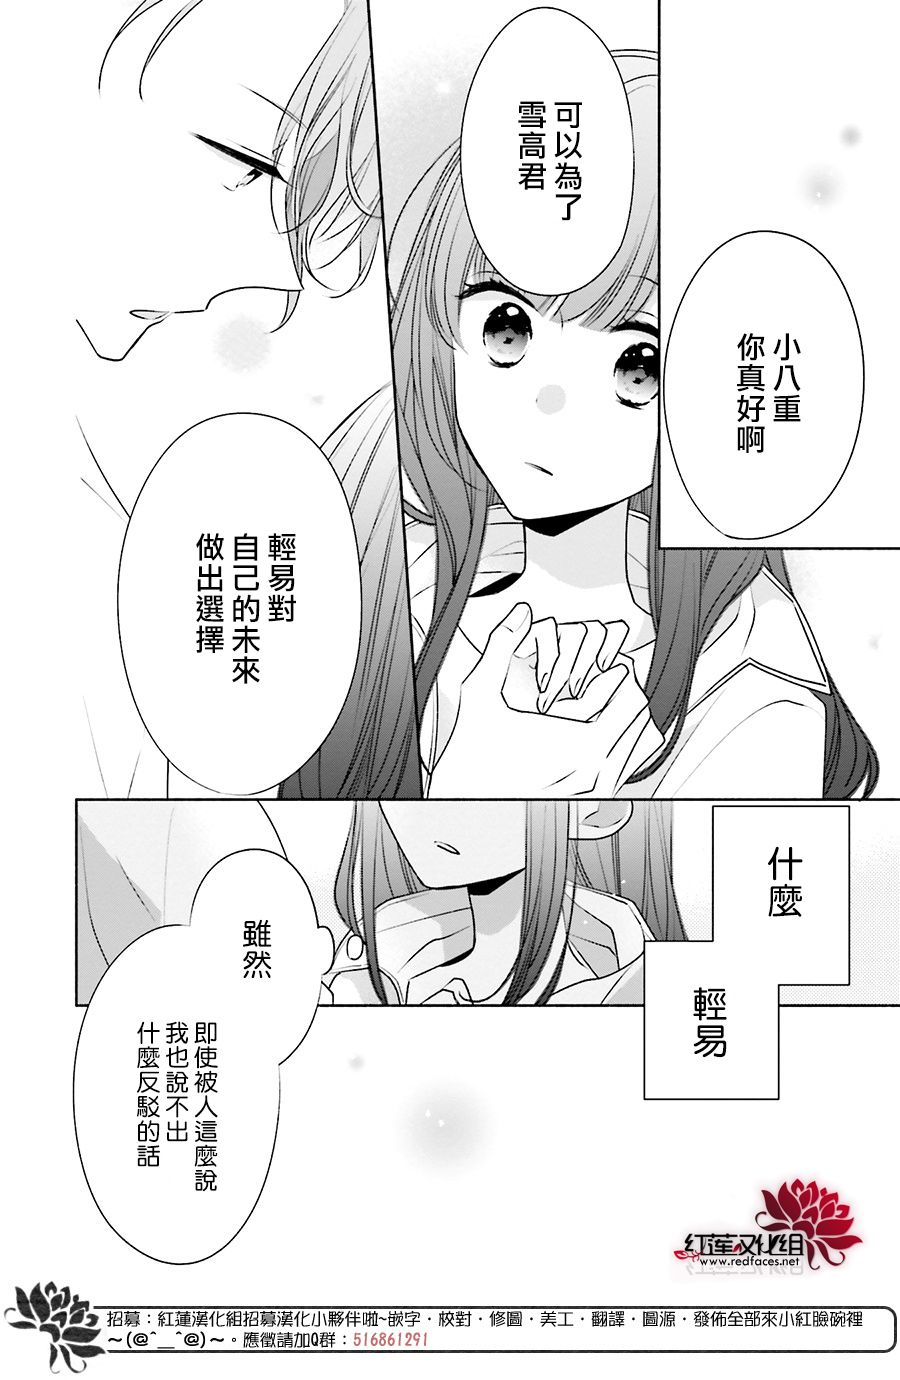 If given a second chance - 24話 - 2